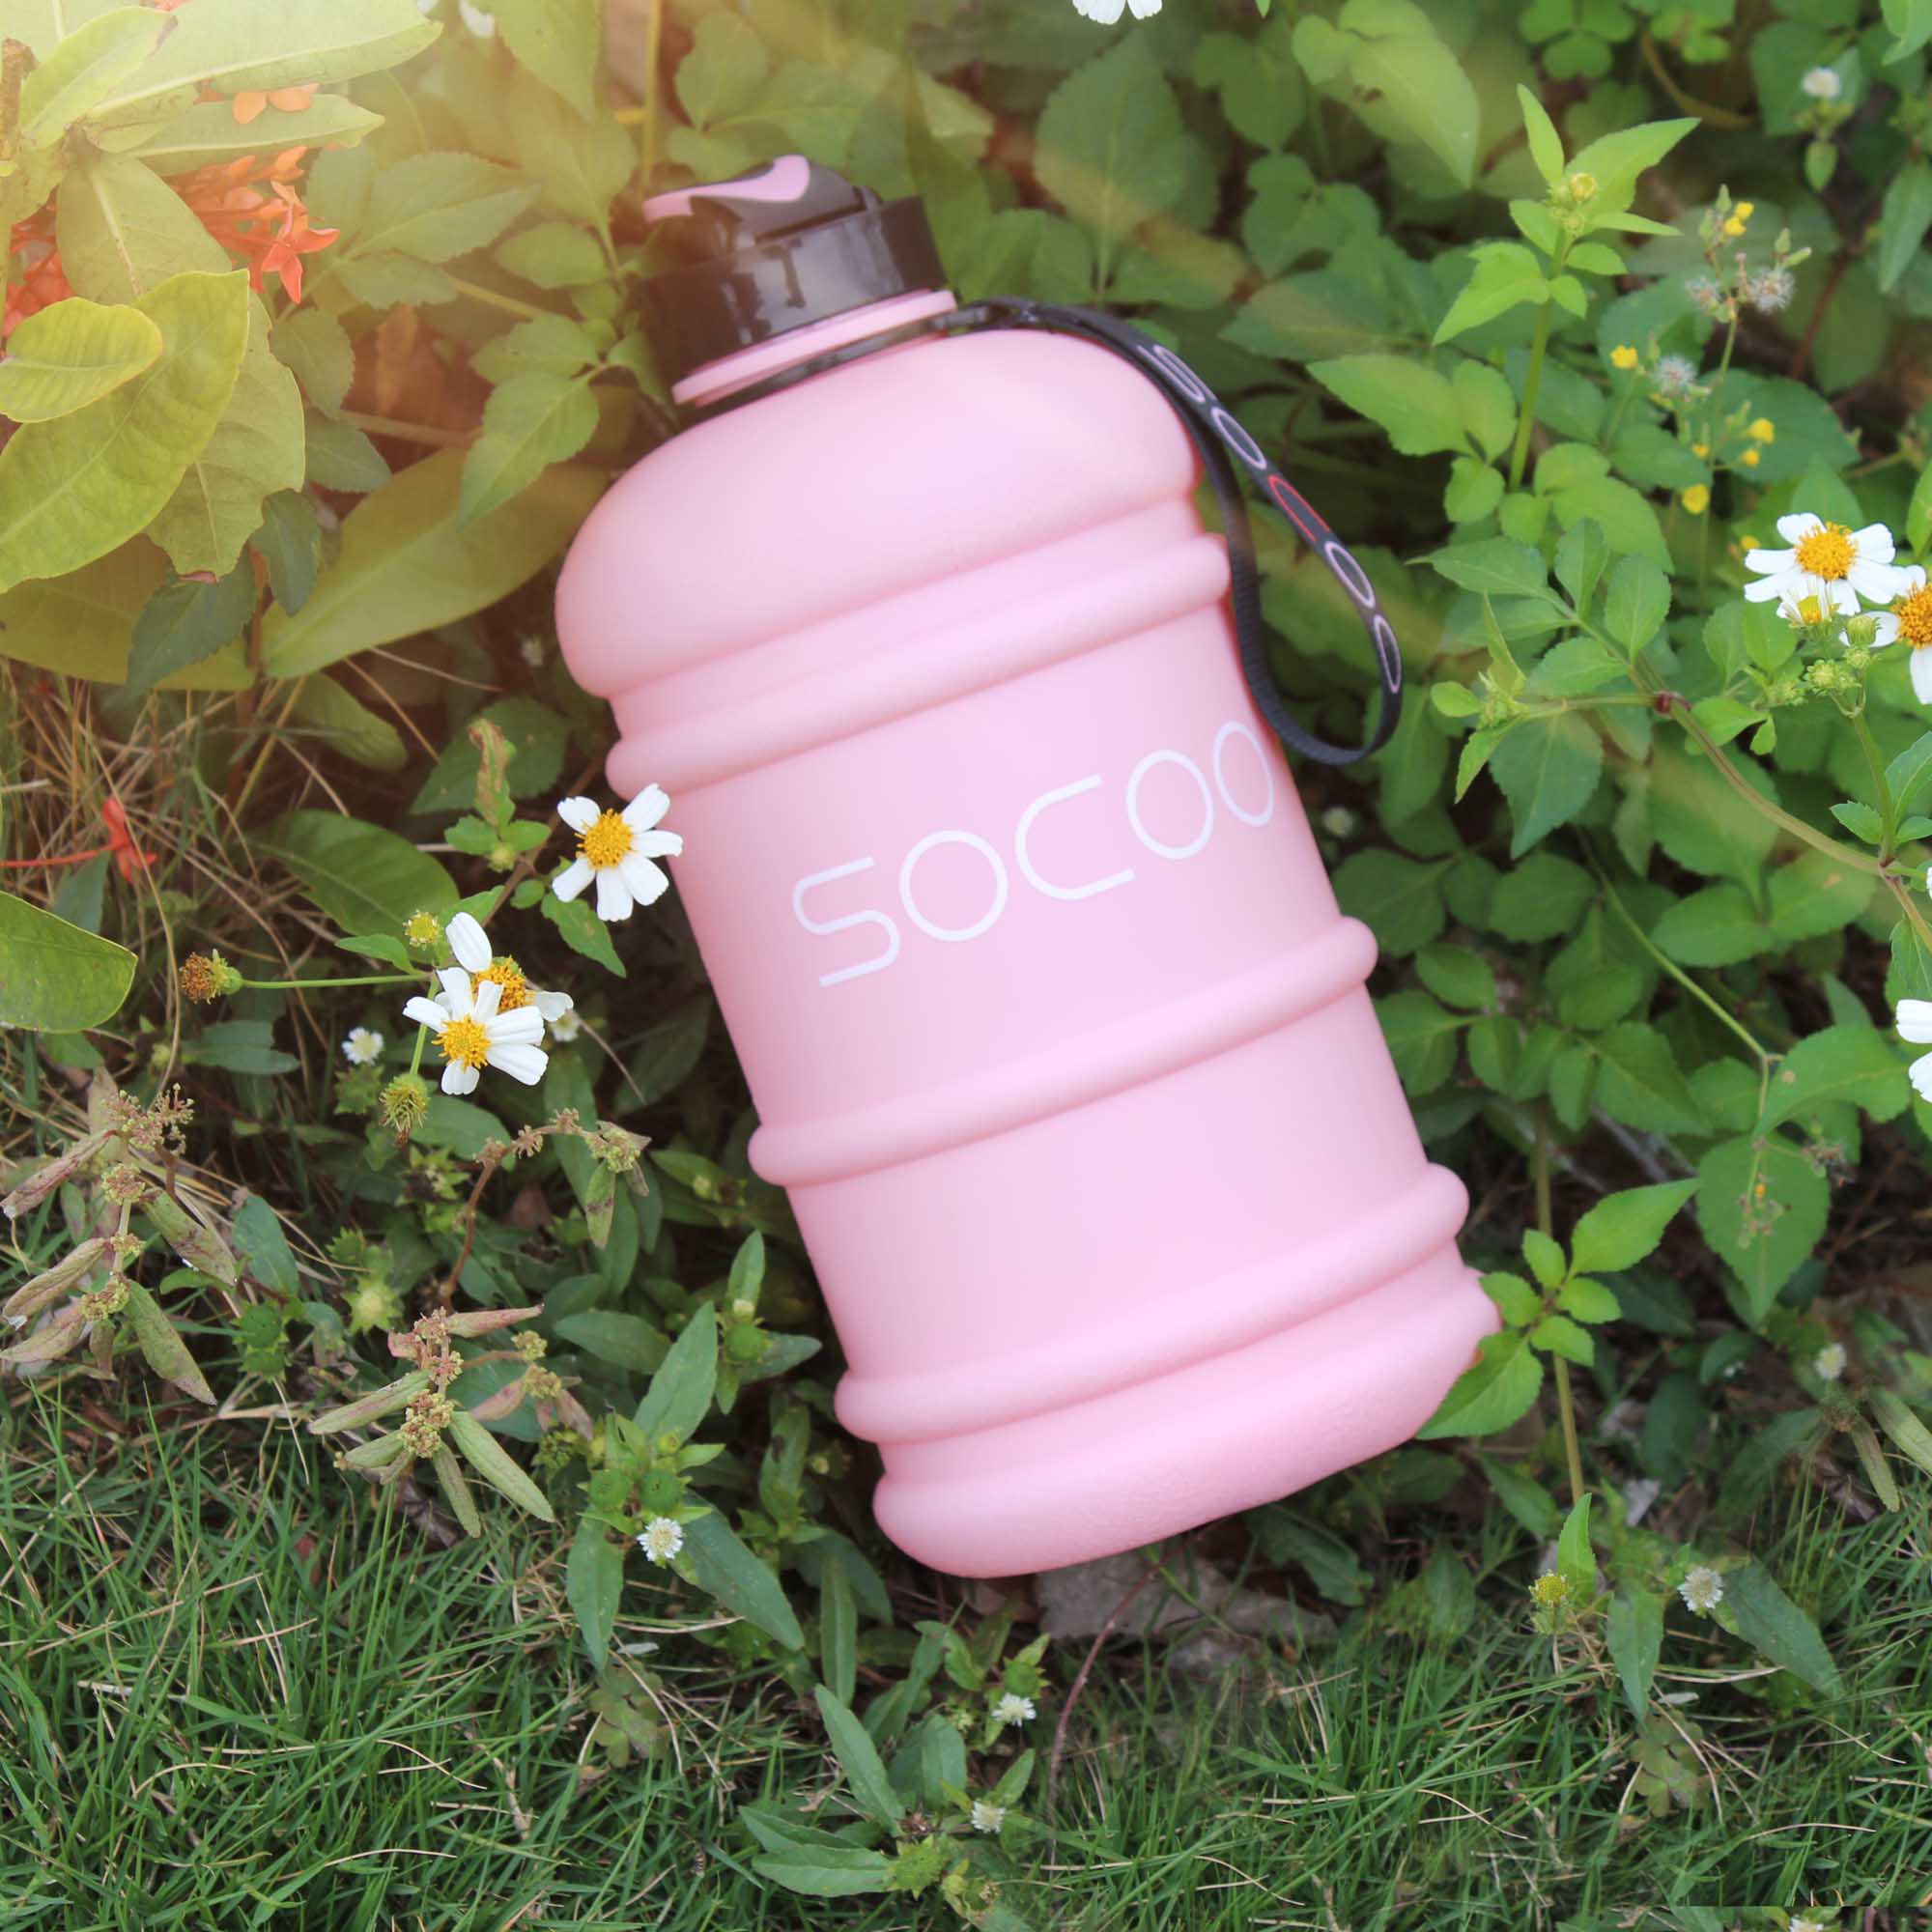 SOCOO Square Gallon Water Bottle pink with Time Marker water jug